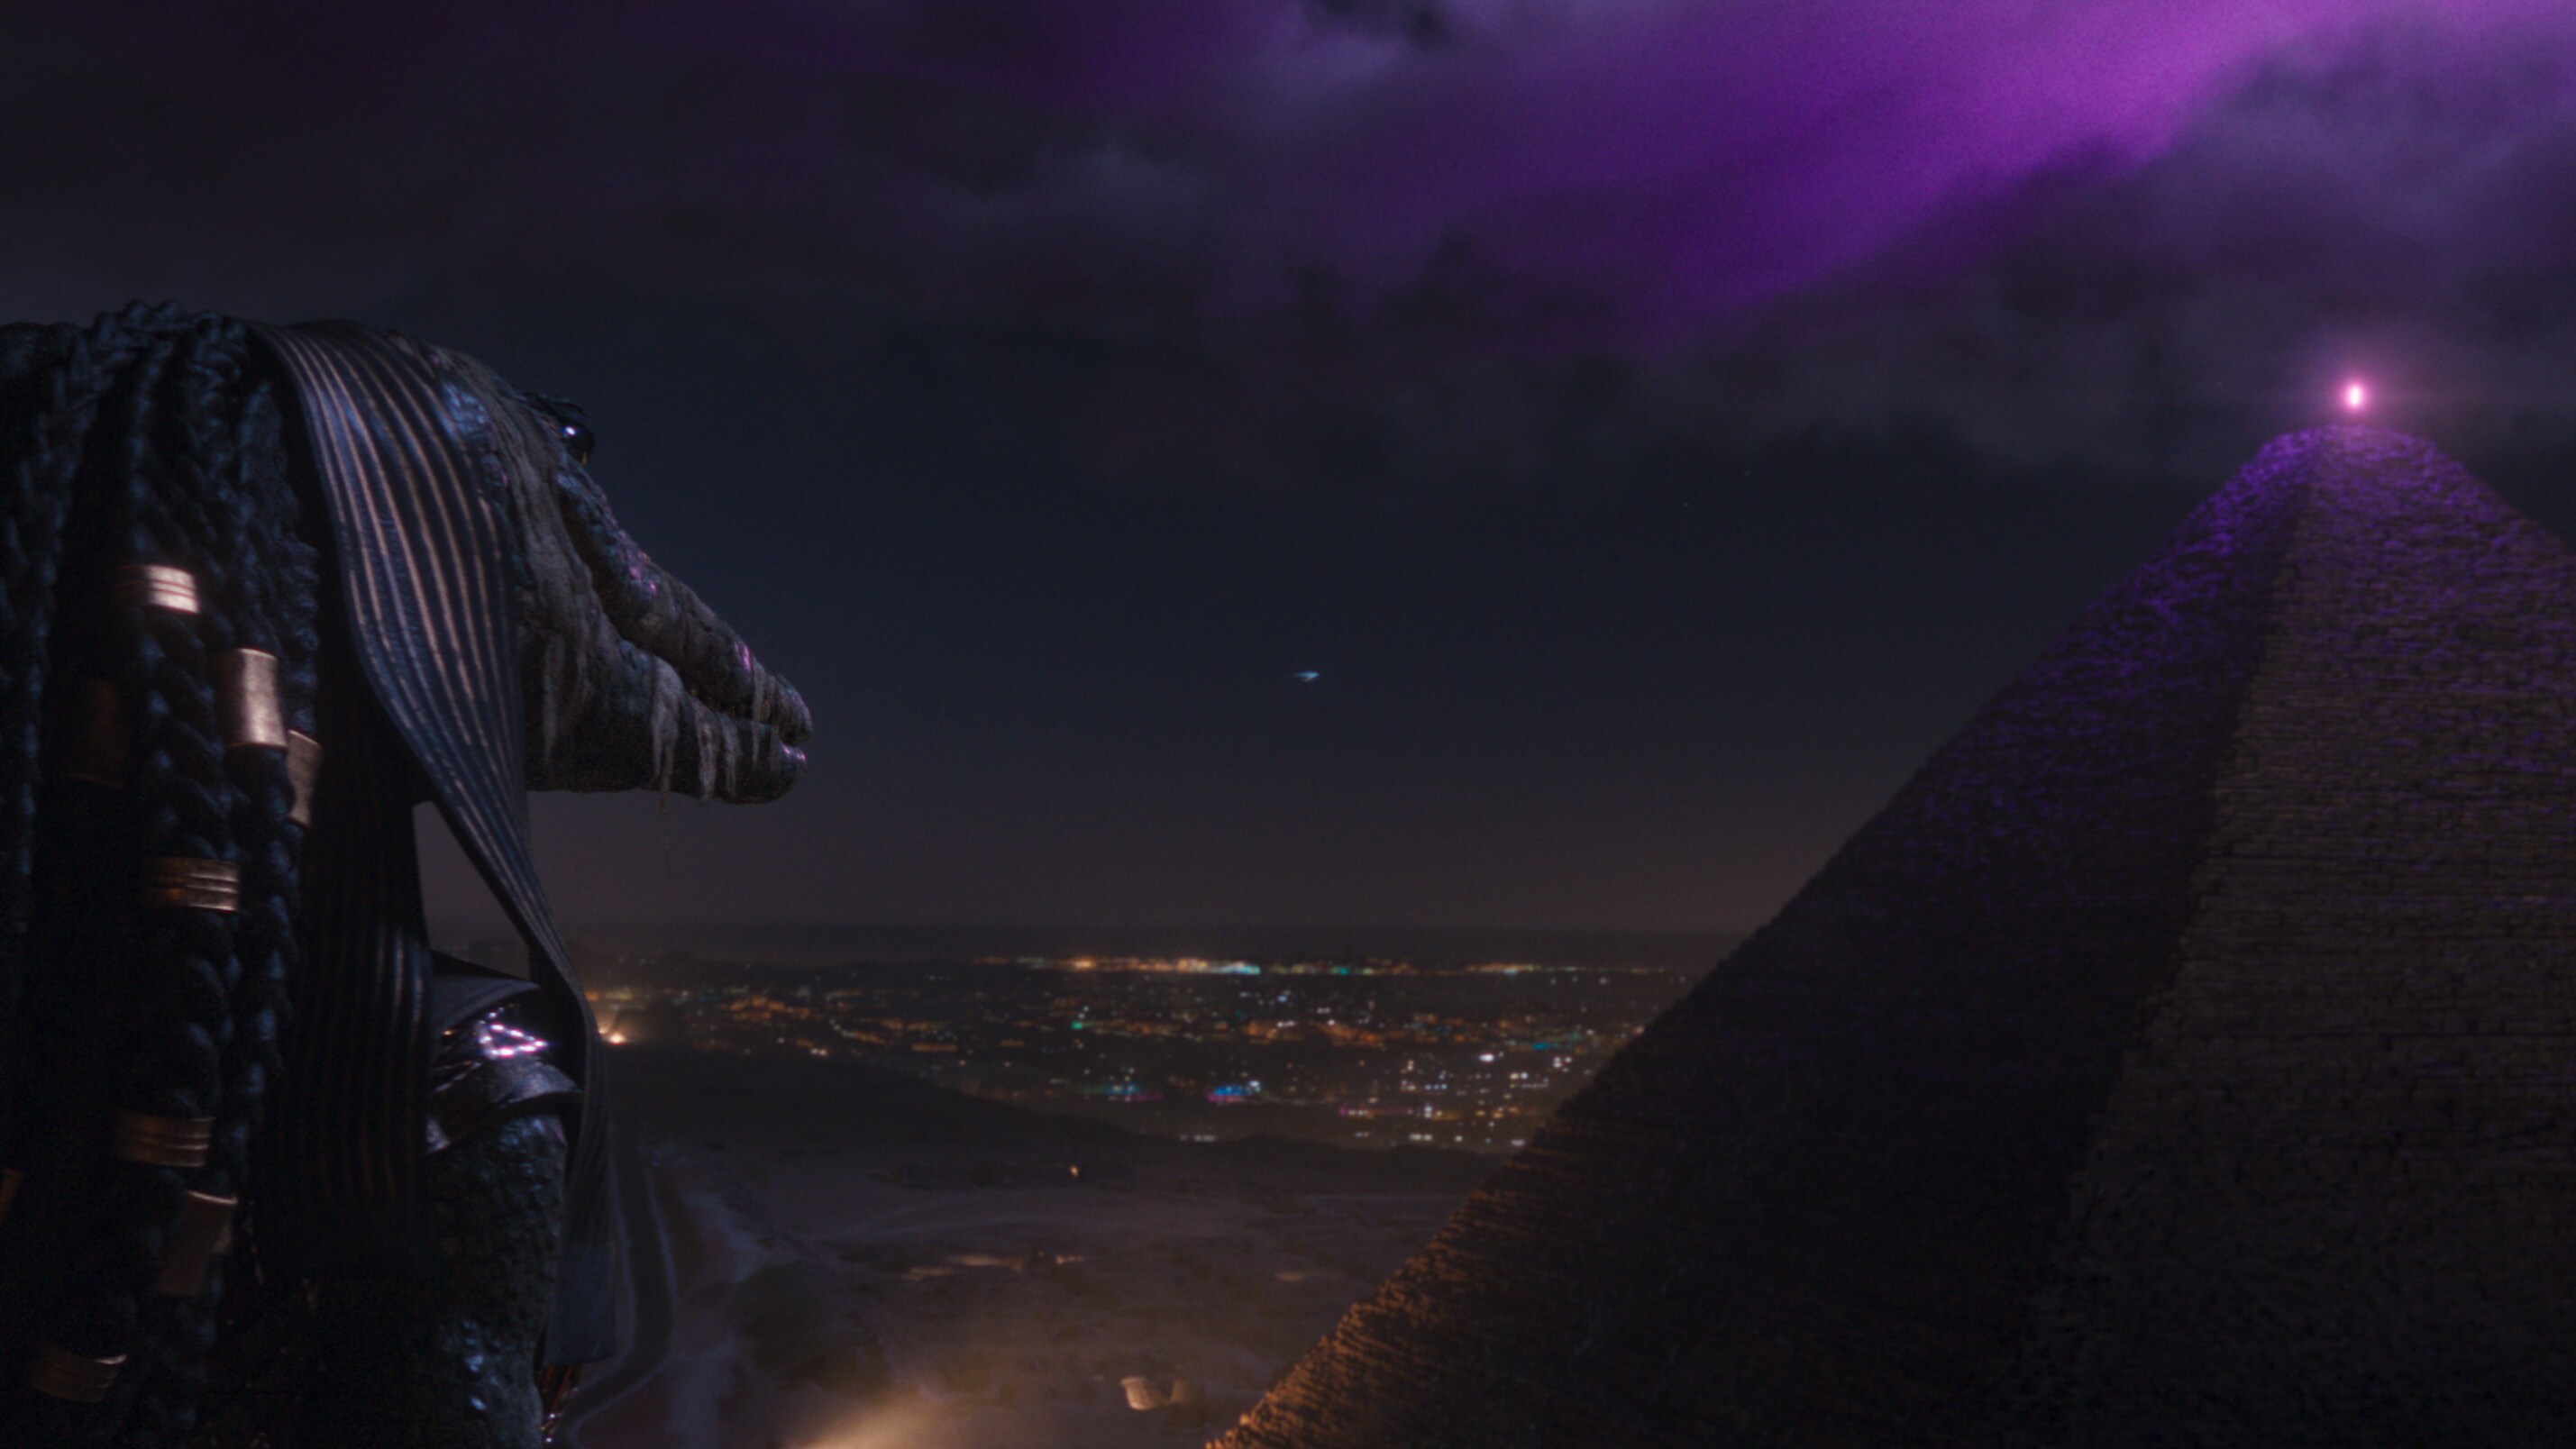 Ammit (voiced by Saba Mubarak) in Marvel Studios' MOON KNIGHT., exclusively on Disney+. Photo courtesy of Marvel Studios. ©Marvel Studios 2022. All Rights Reserved.